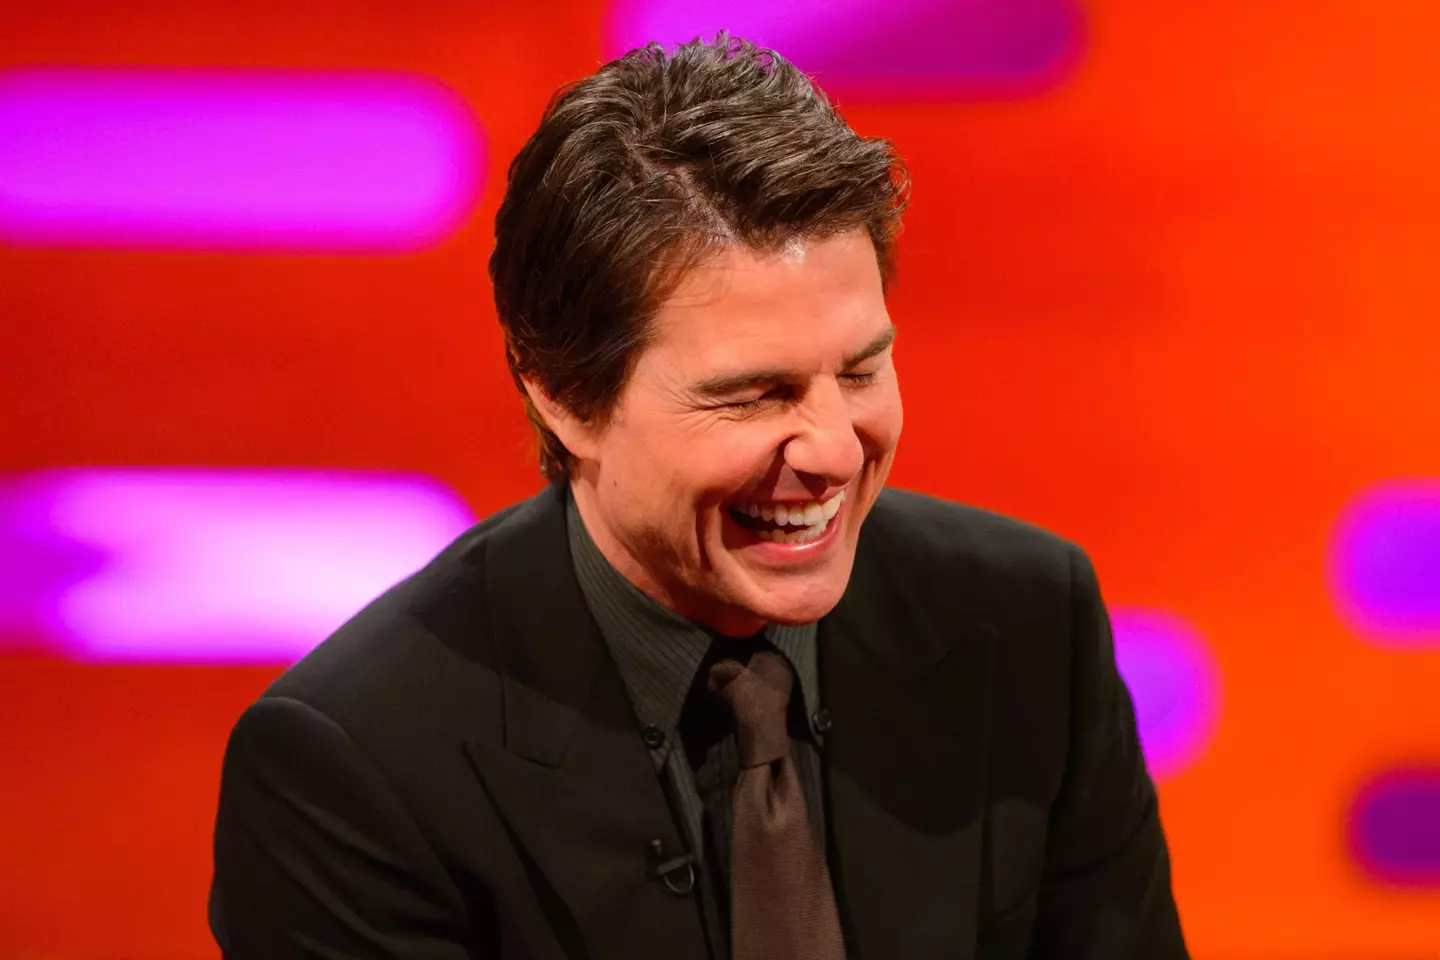 Tom Cruise during a recording of the Graham Norton Show, at the London Studios, in central London.